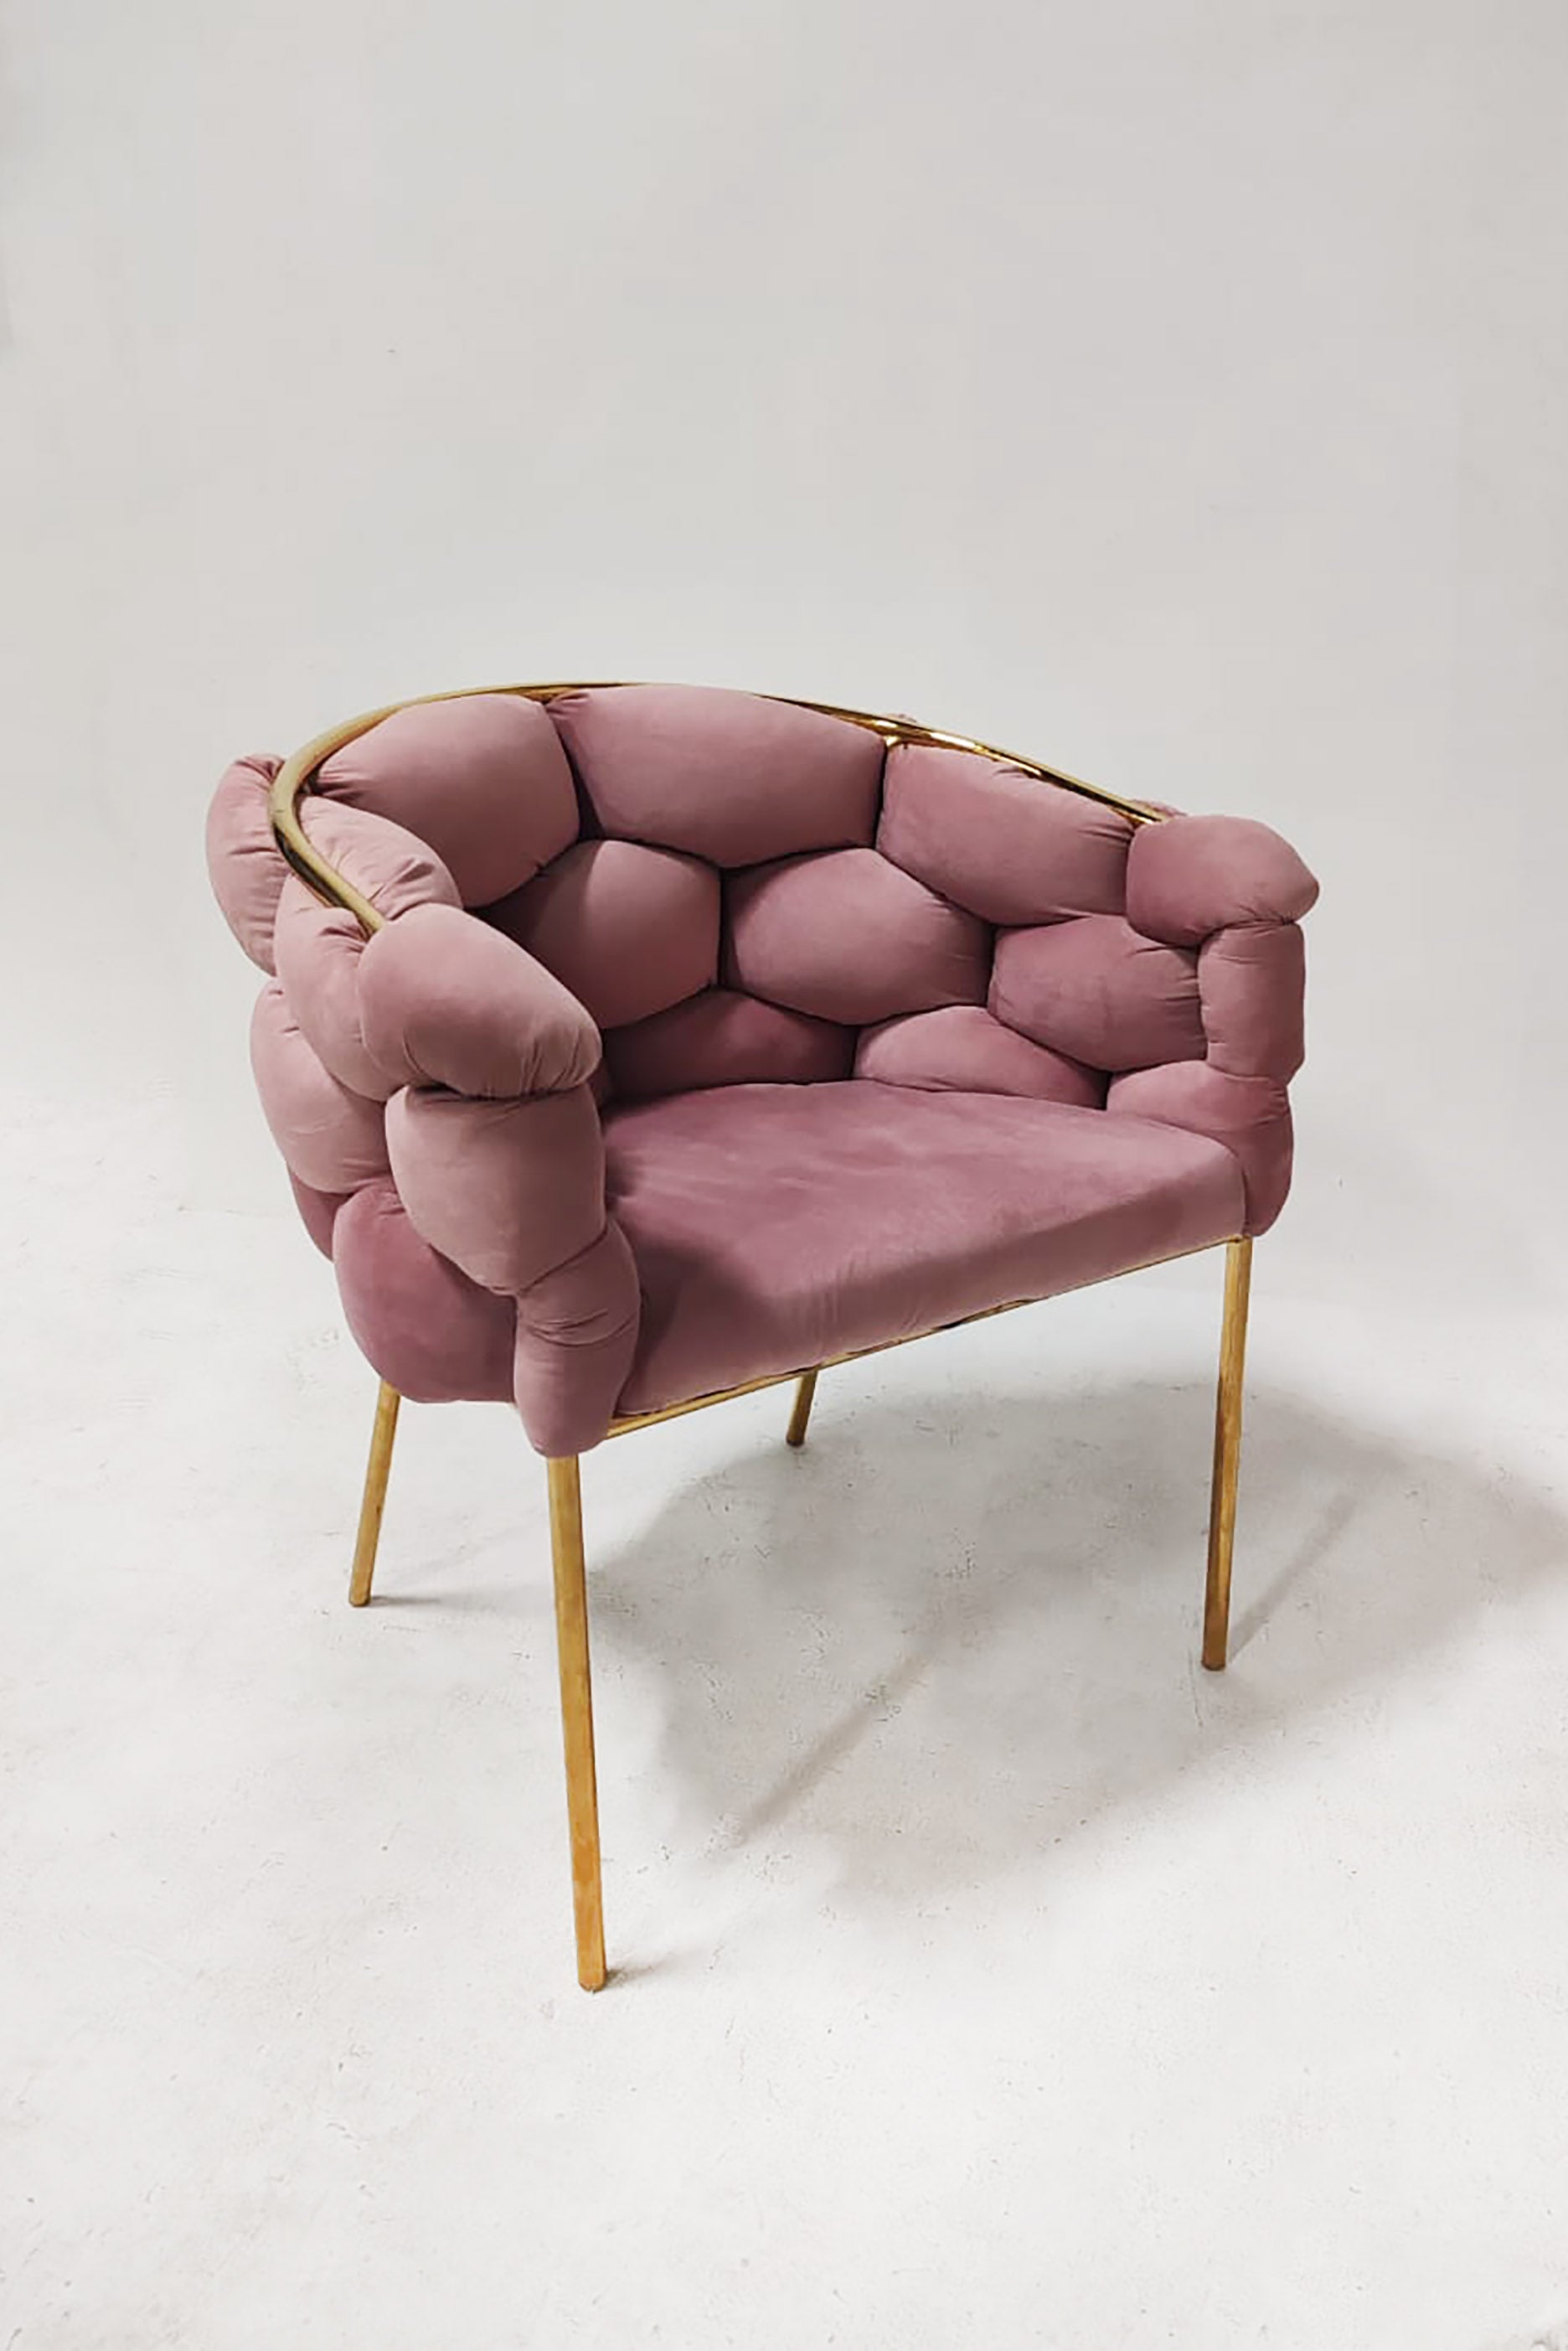 Modern Pink Accent Design Chair (6 pieces available)